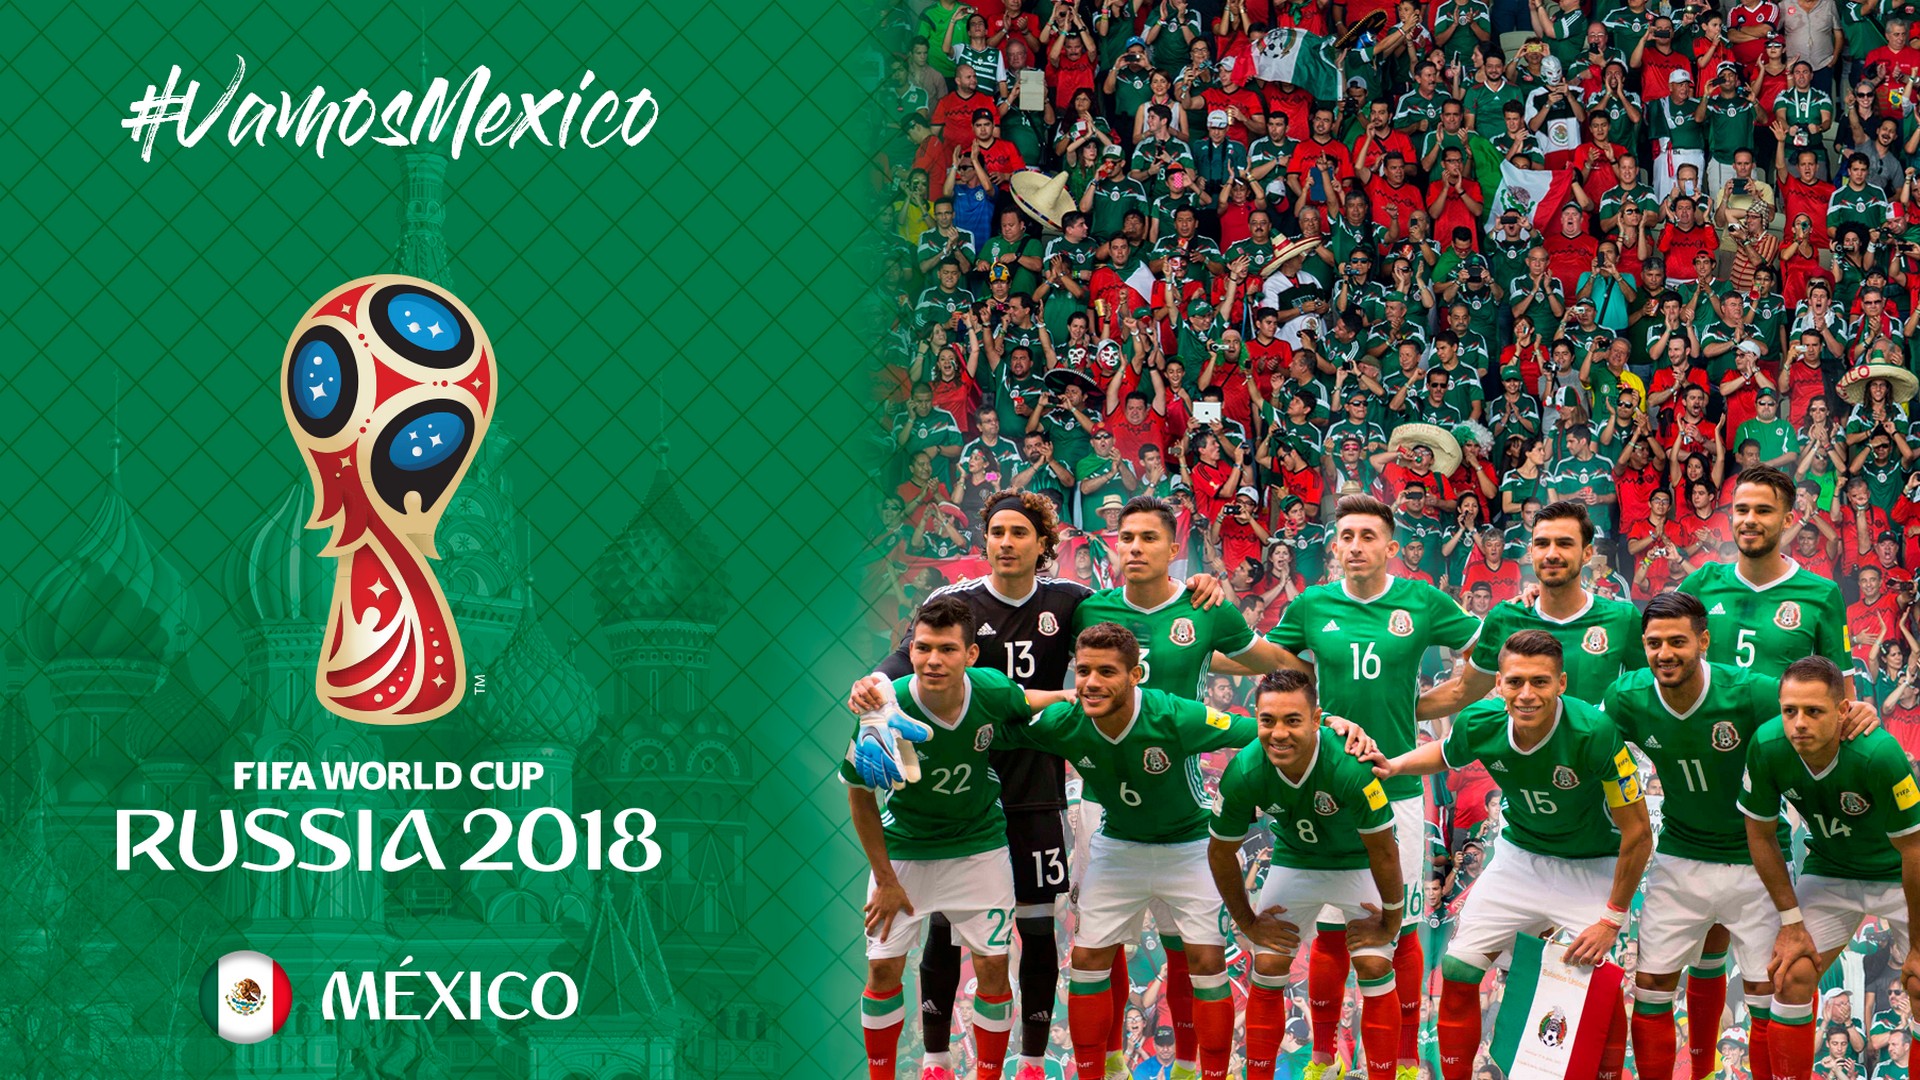 Mexico National Team Wallpaper HD With Resolution 1920X1080 pixel. You can make this wallpaper for your Mac or Windows Desktop Background, iPhone, Android or Tablet and another Smartphone device for free